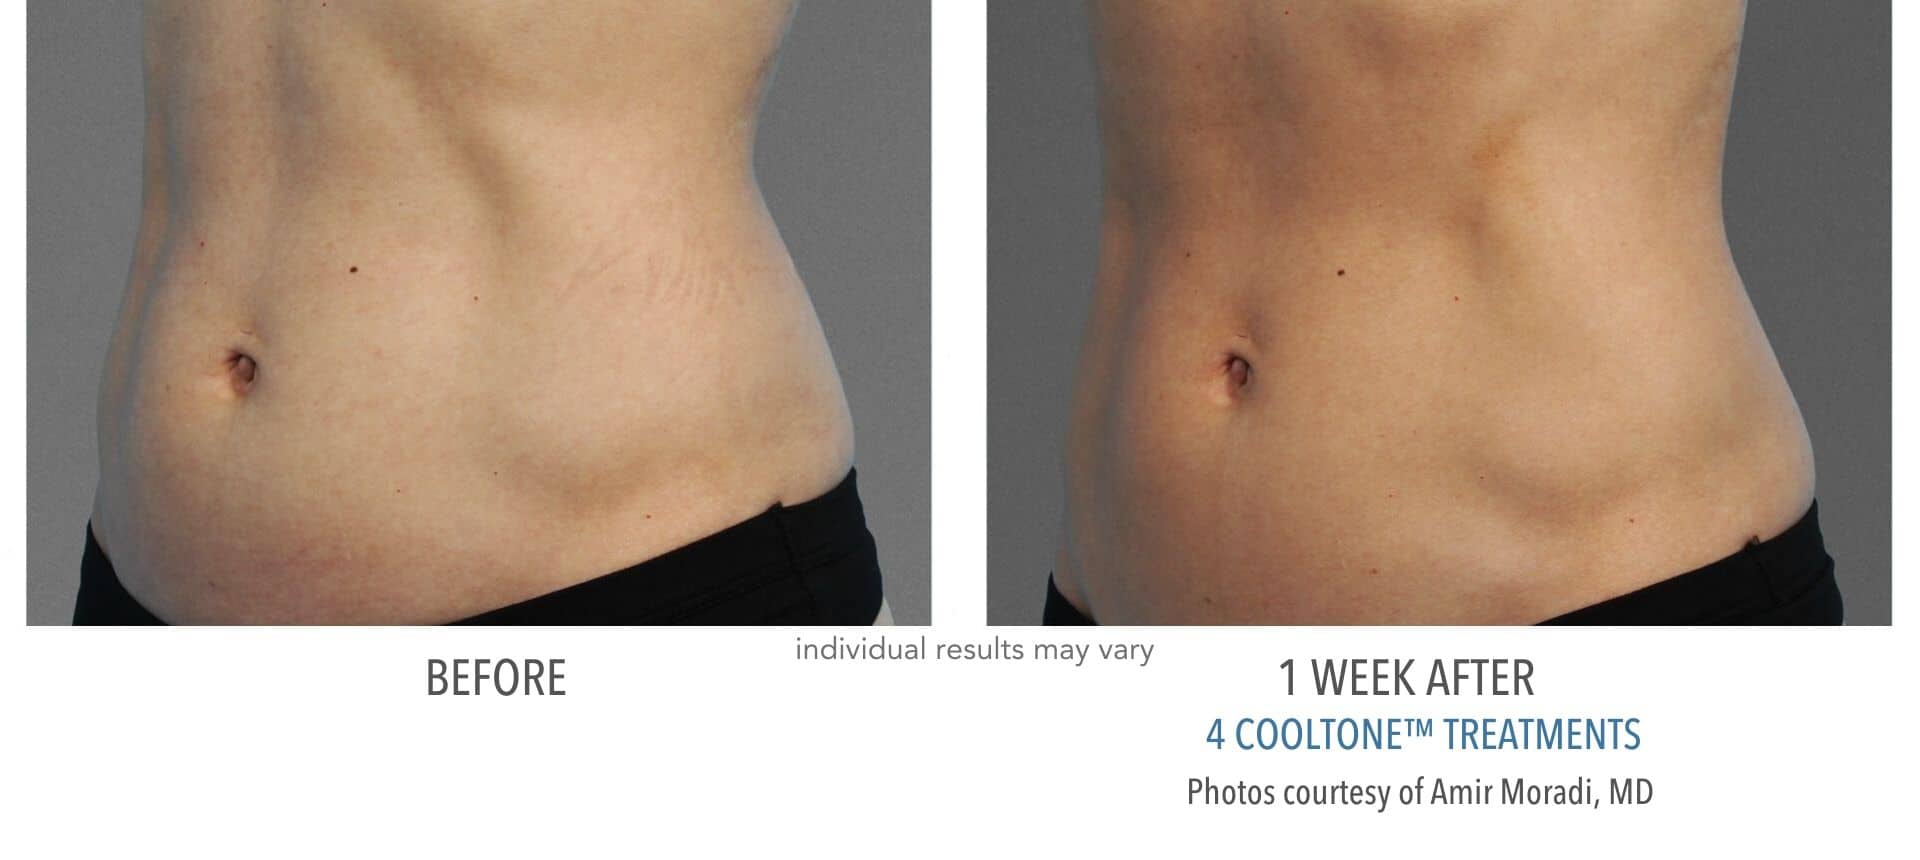 cooltone before and after results on woman's abdomen.